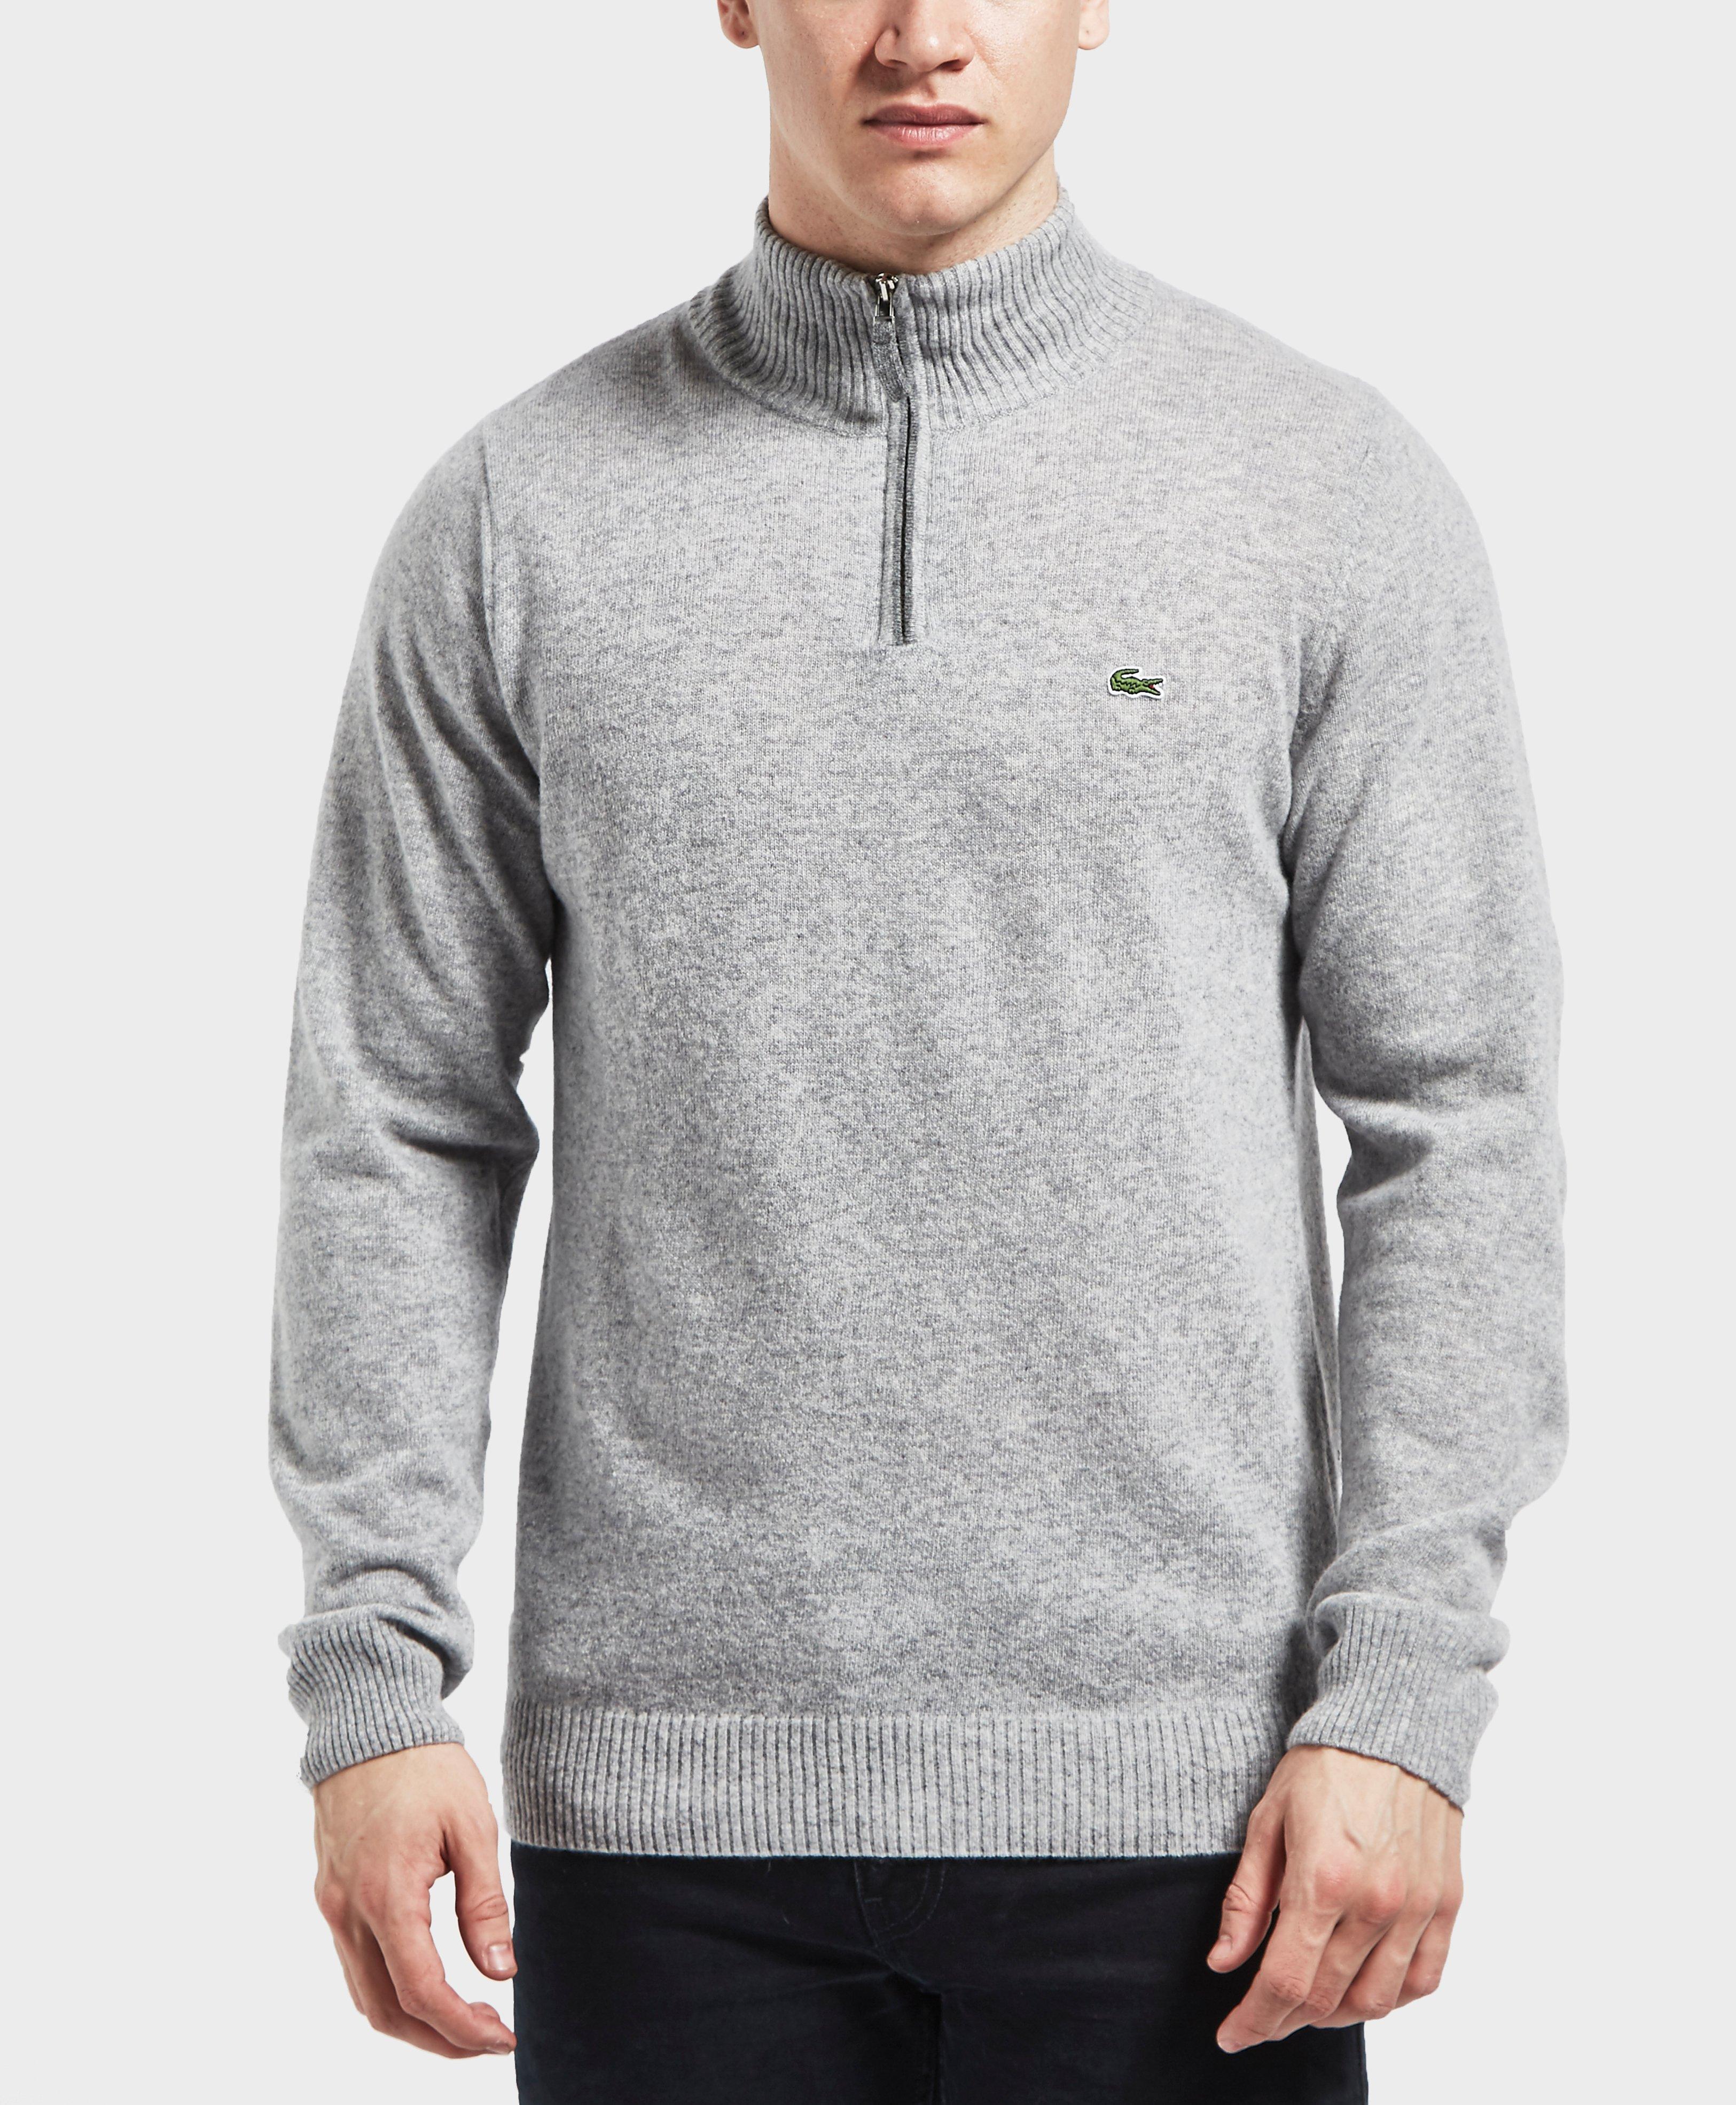 Lyst - Lacoste Half Zip Knitted Jumper in Gray for Men